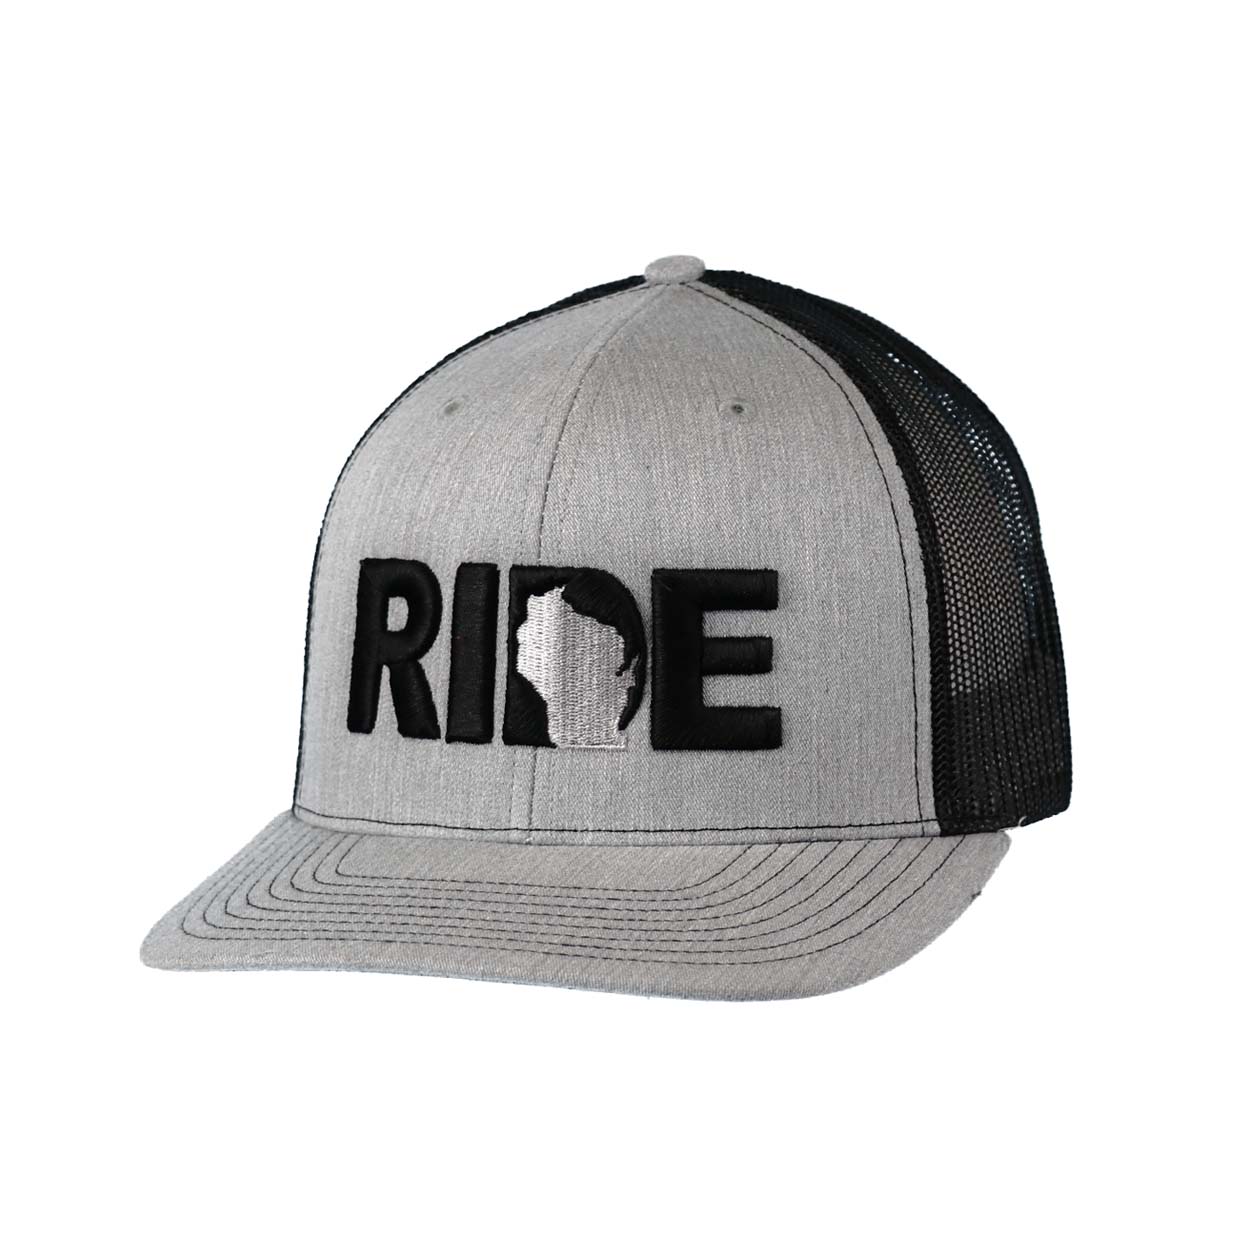 Ride Wisconsin Classic Embroidered Snapback Trucker Hat Heather Gray/Black